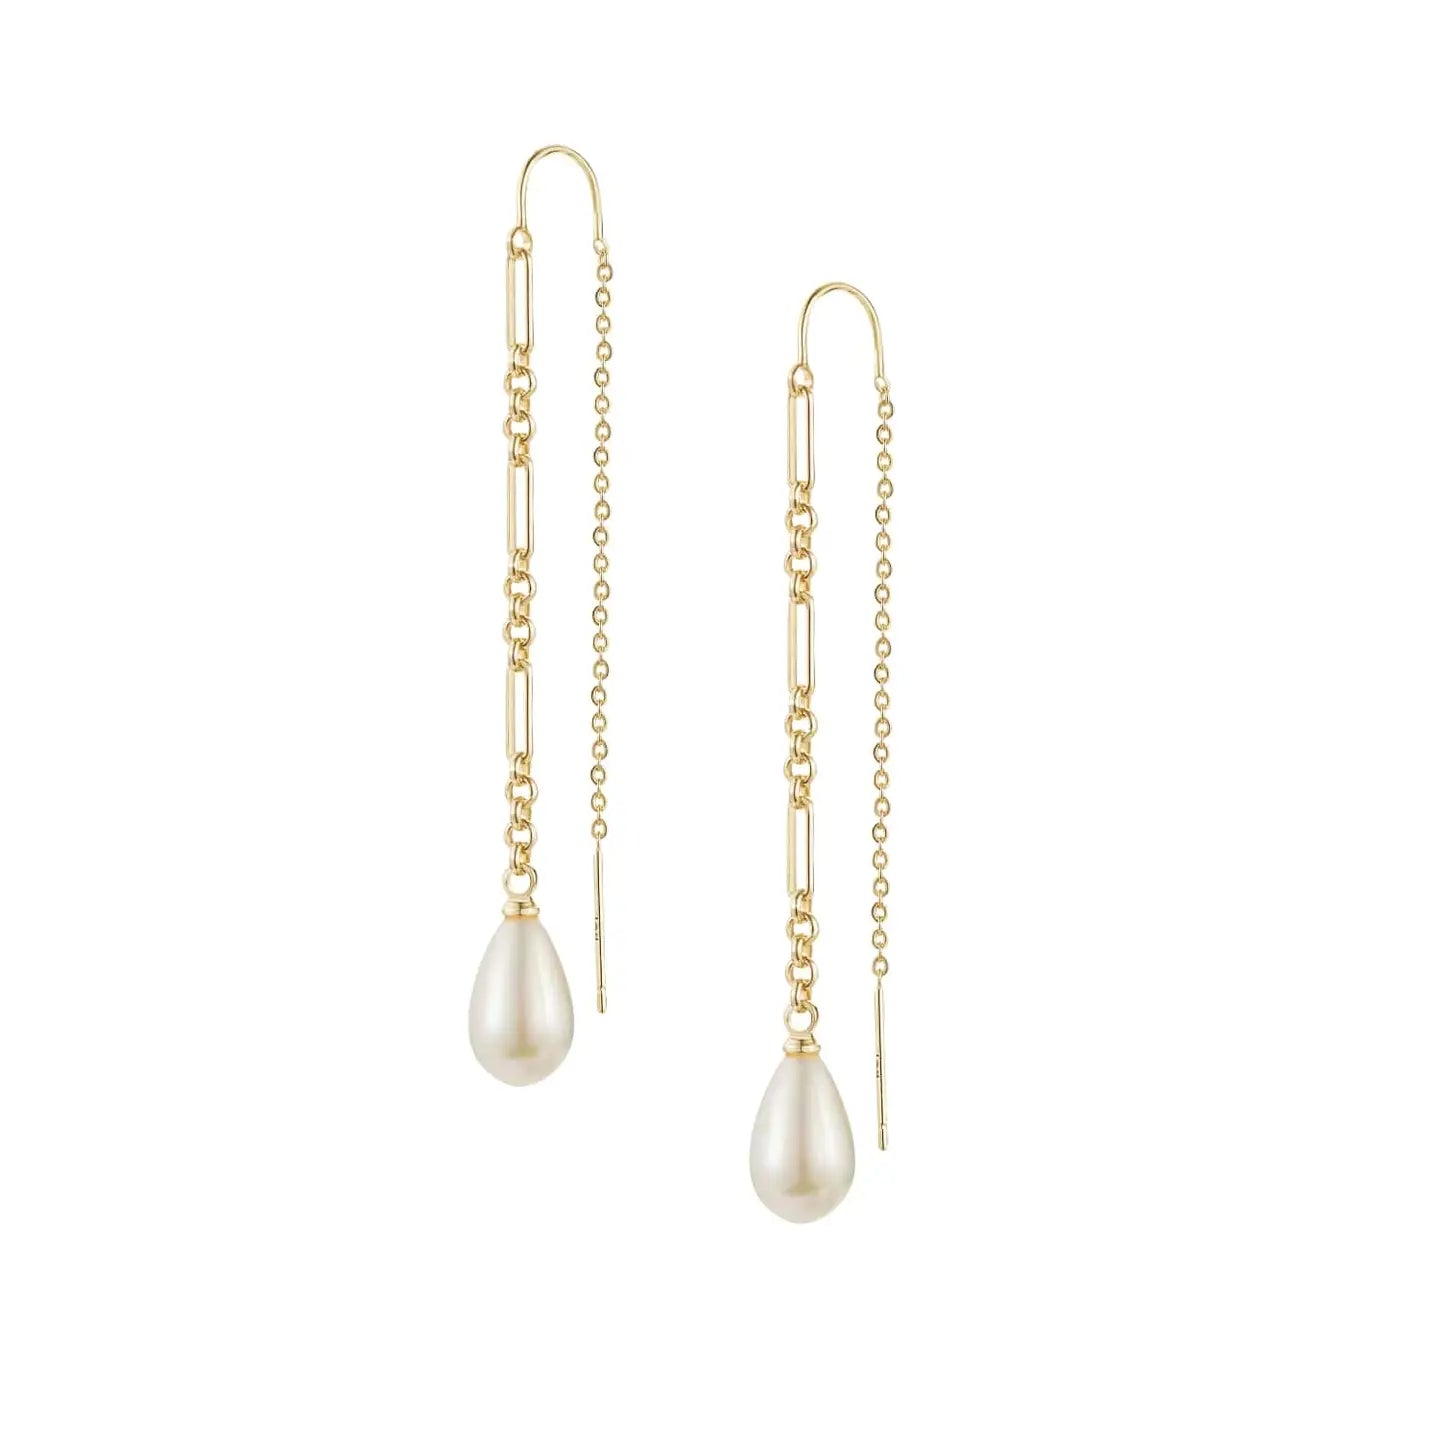 Natalie Wood - Adorned Pearl Ear Threader Earrings-Natalie Wood-July & June Women's Fashion Boutique Located in San Antonio, Texas